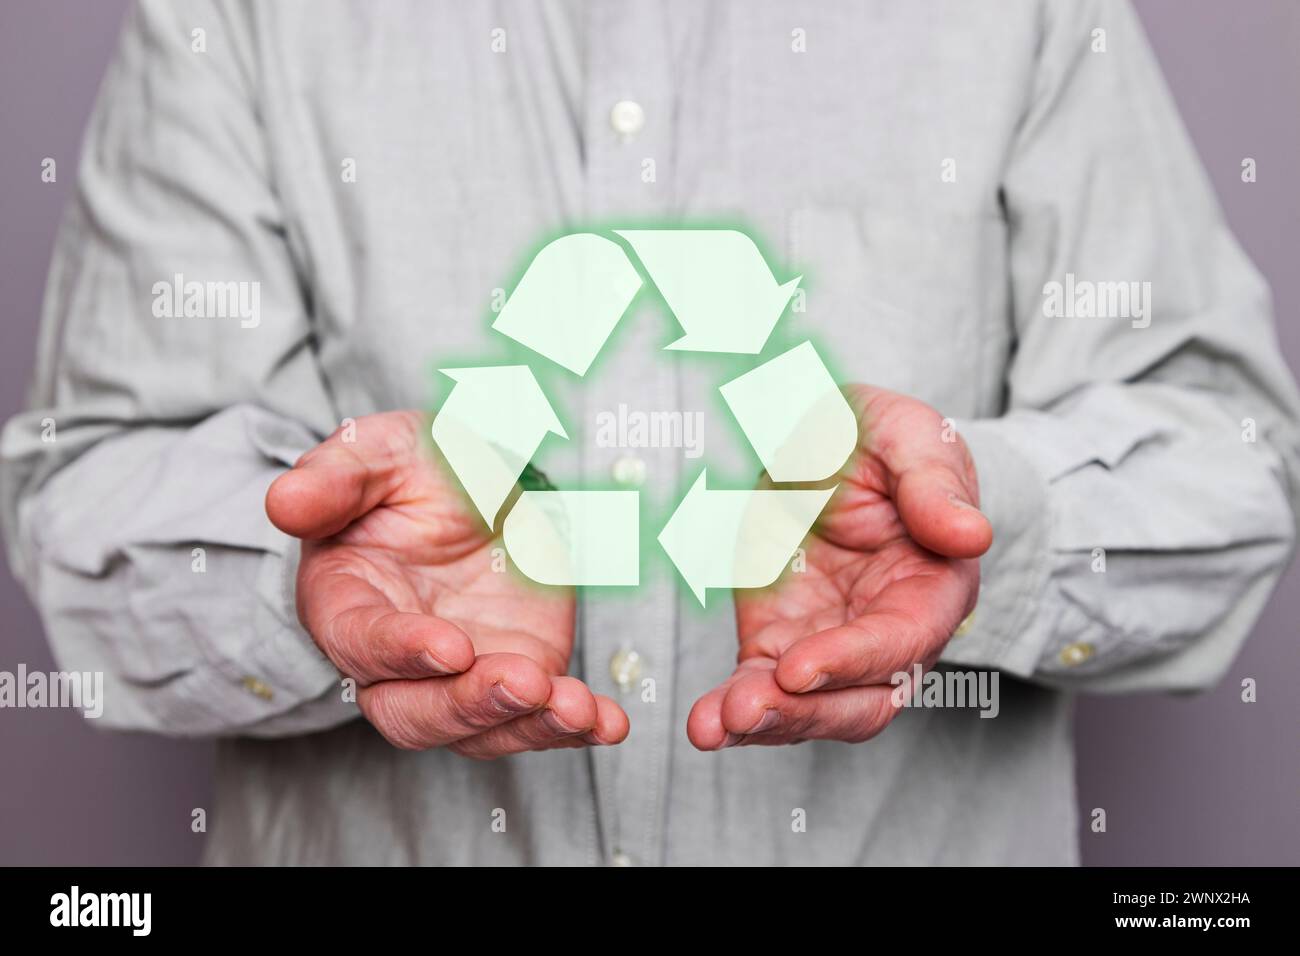 Close-up of an unrecognizable person's hands holding a floating recycling symbol. Stock Photo